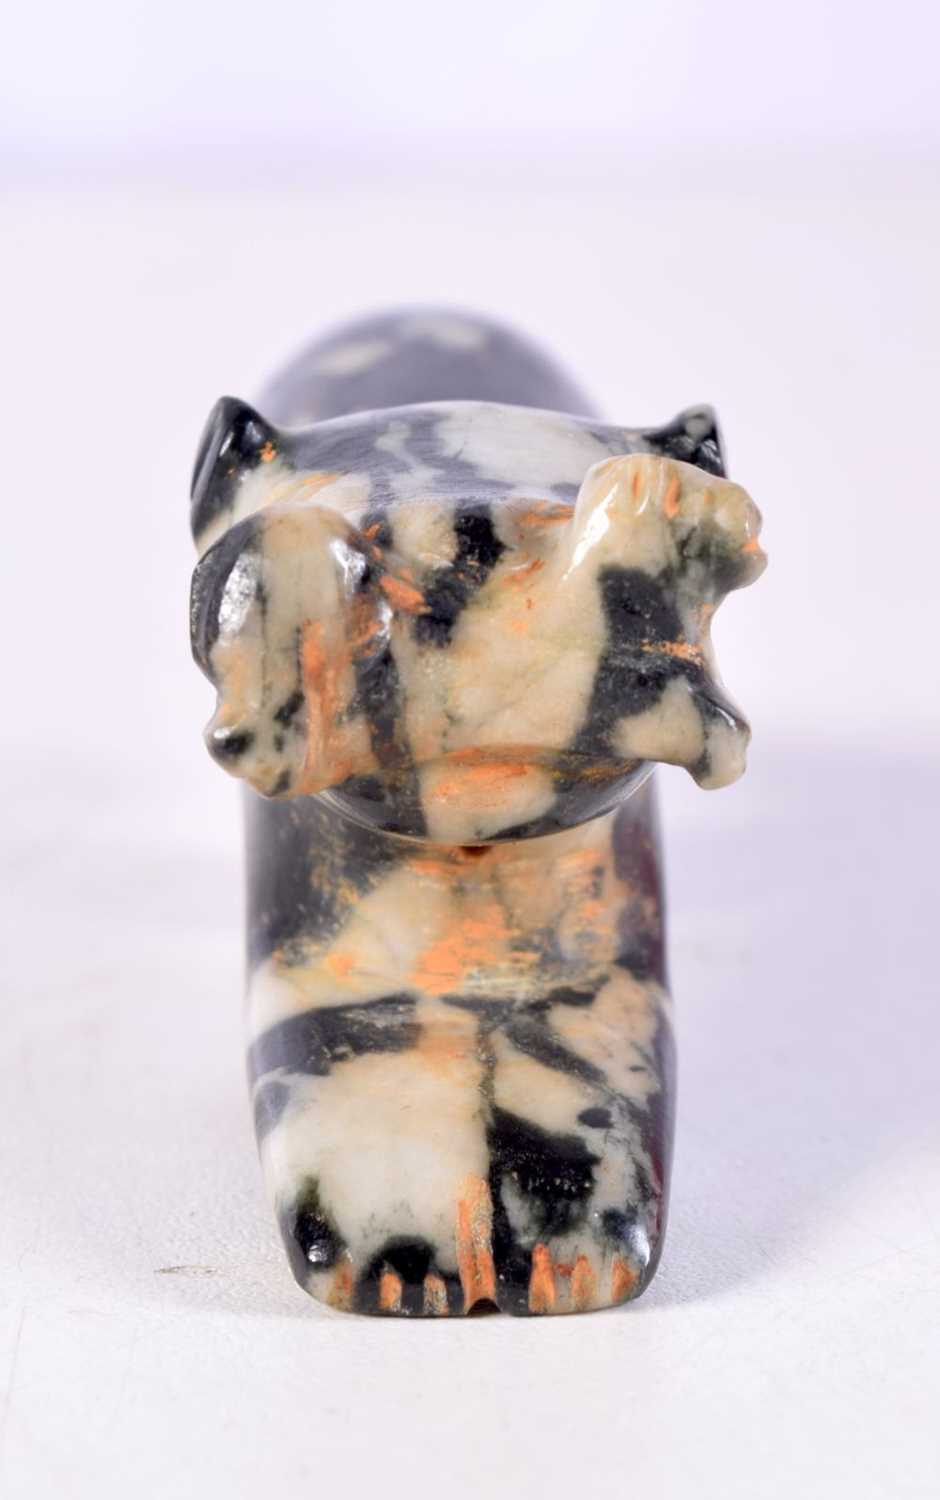 A MIDDLE EASTERN CARVED JADE BEAST. 11 cm x 3.25 cm. - Image 4 of 4